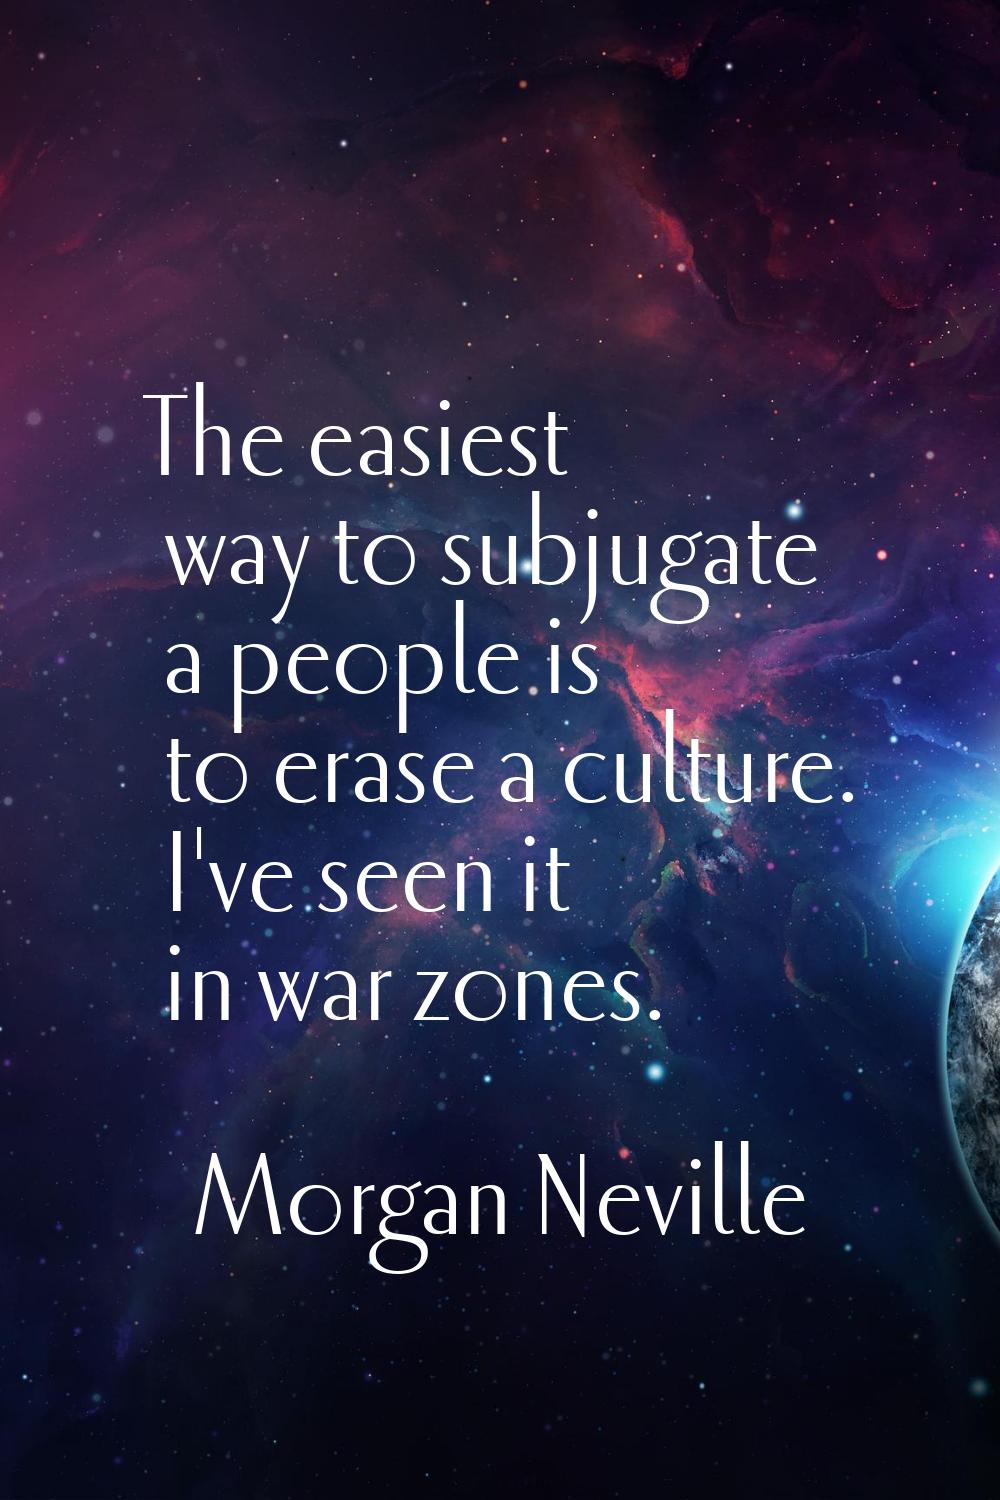 The easiest way to subjugate a people is to erase a culture. I've seen it in war zones.